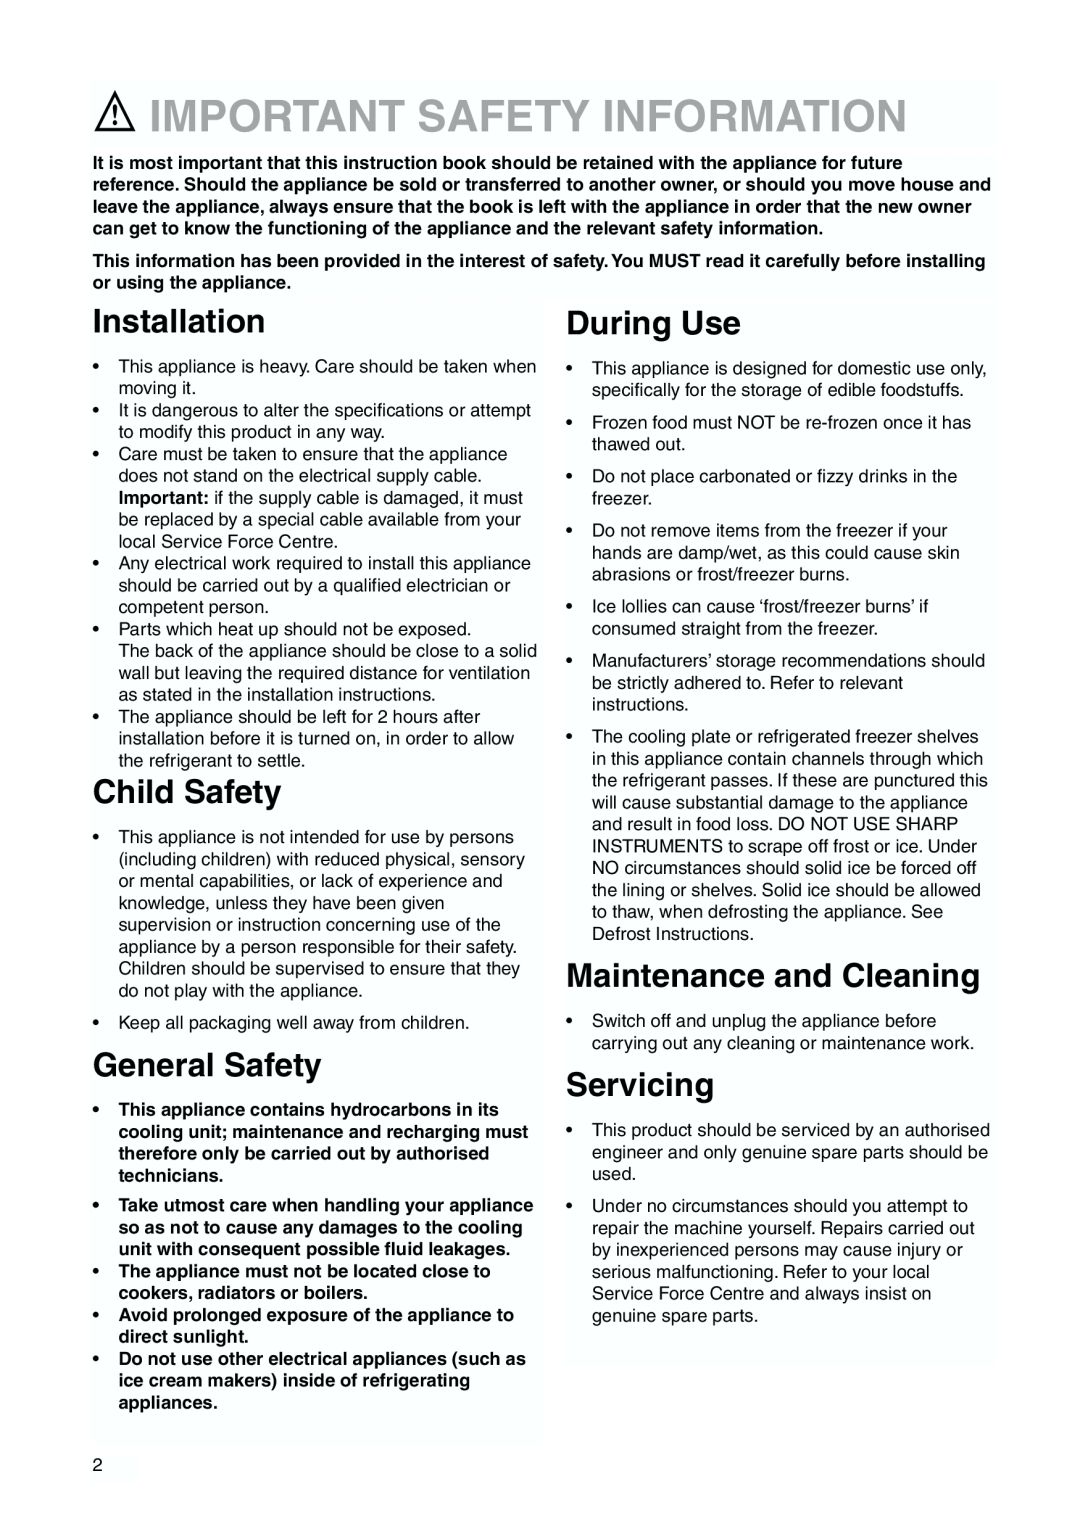 Zanussi ZBB 7294 manual Important Safety Information, Installation, Child Safety, General Safety, During Use, Servicing 